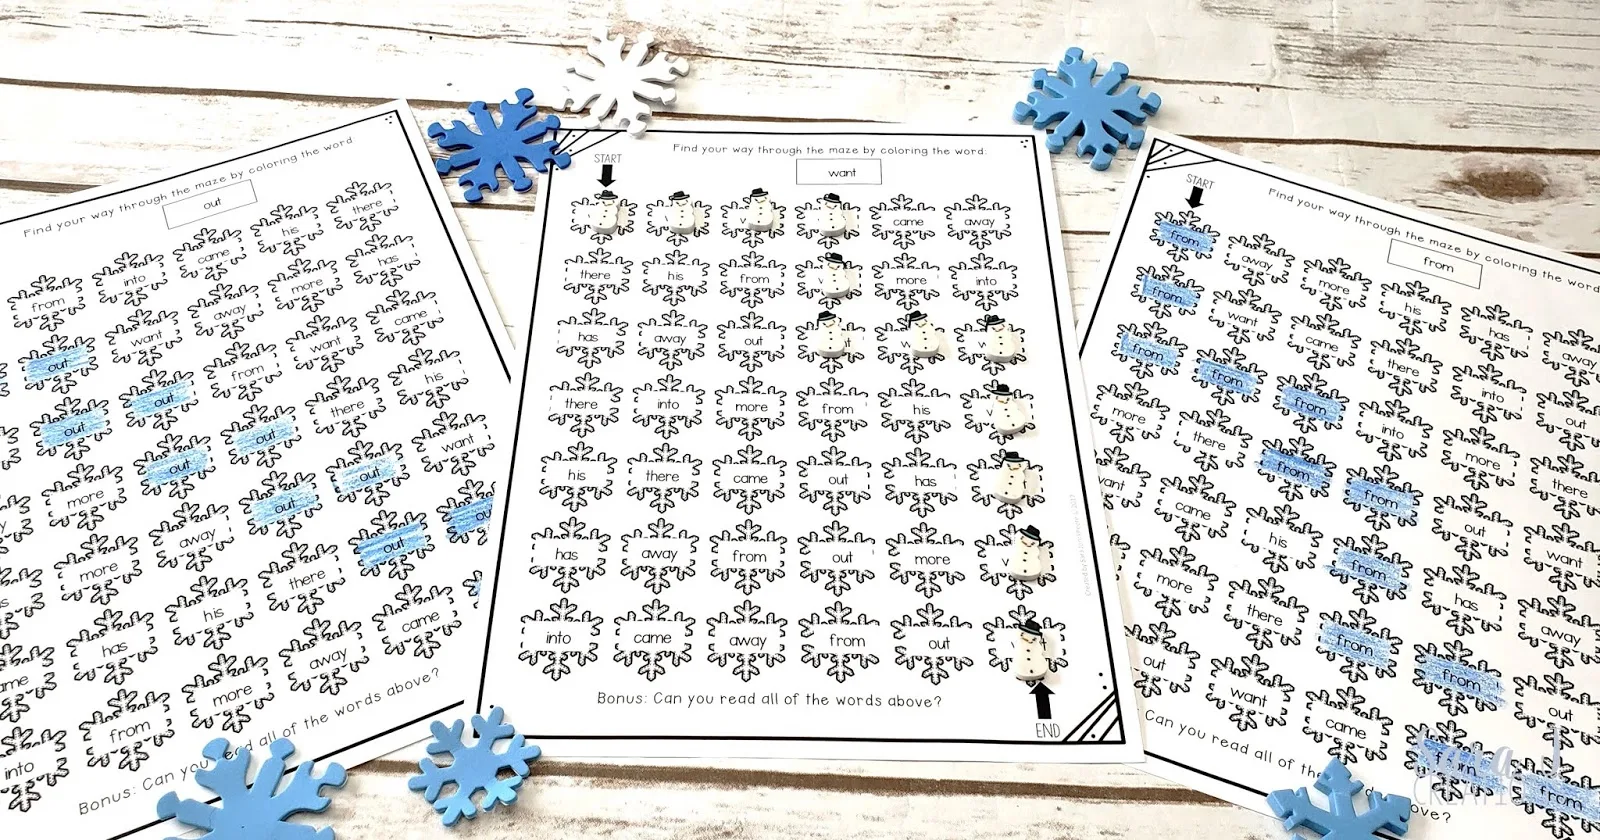 Free sight words printable mazes. With a fun snowflake theme, these are perfect for practicing any sight word list during the winter months.